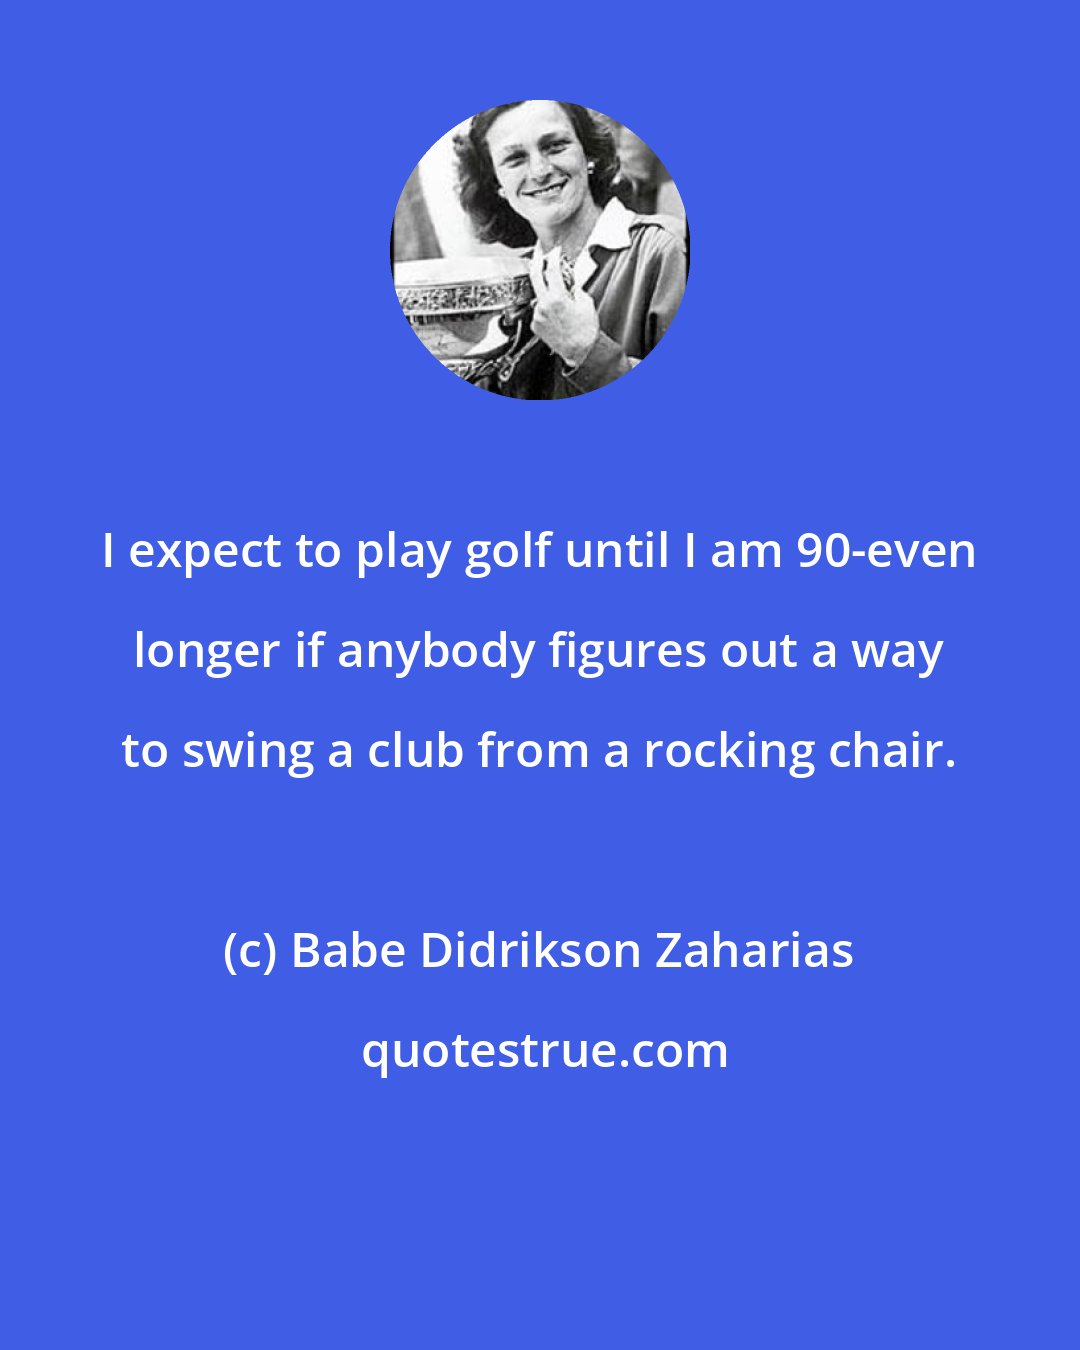 Babe Didrikson Zaharias: I expect to play golf until I am 90-even longer if anybody figures out a way to swing a club from a rocking chair.